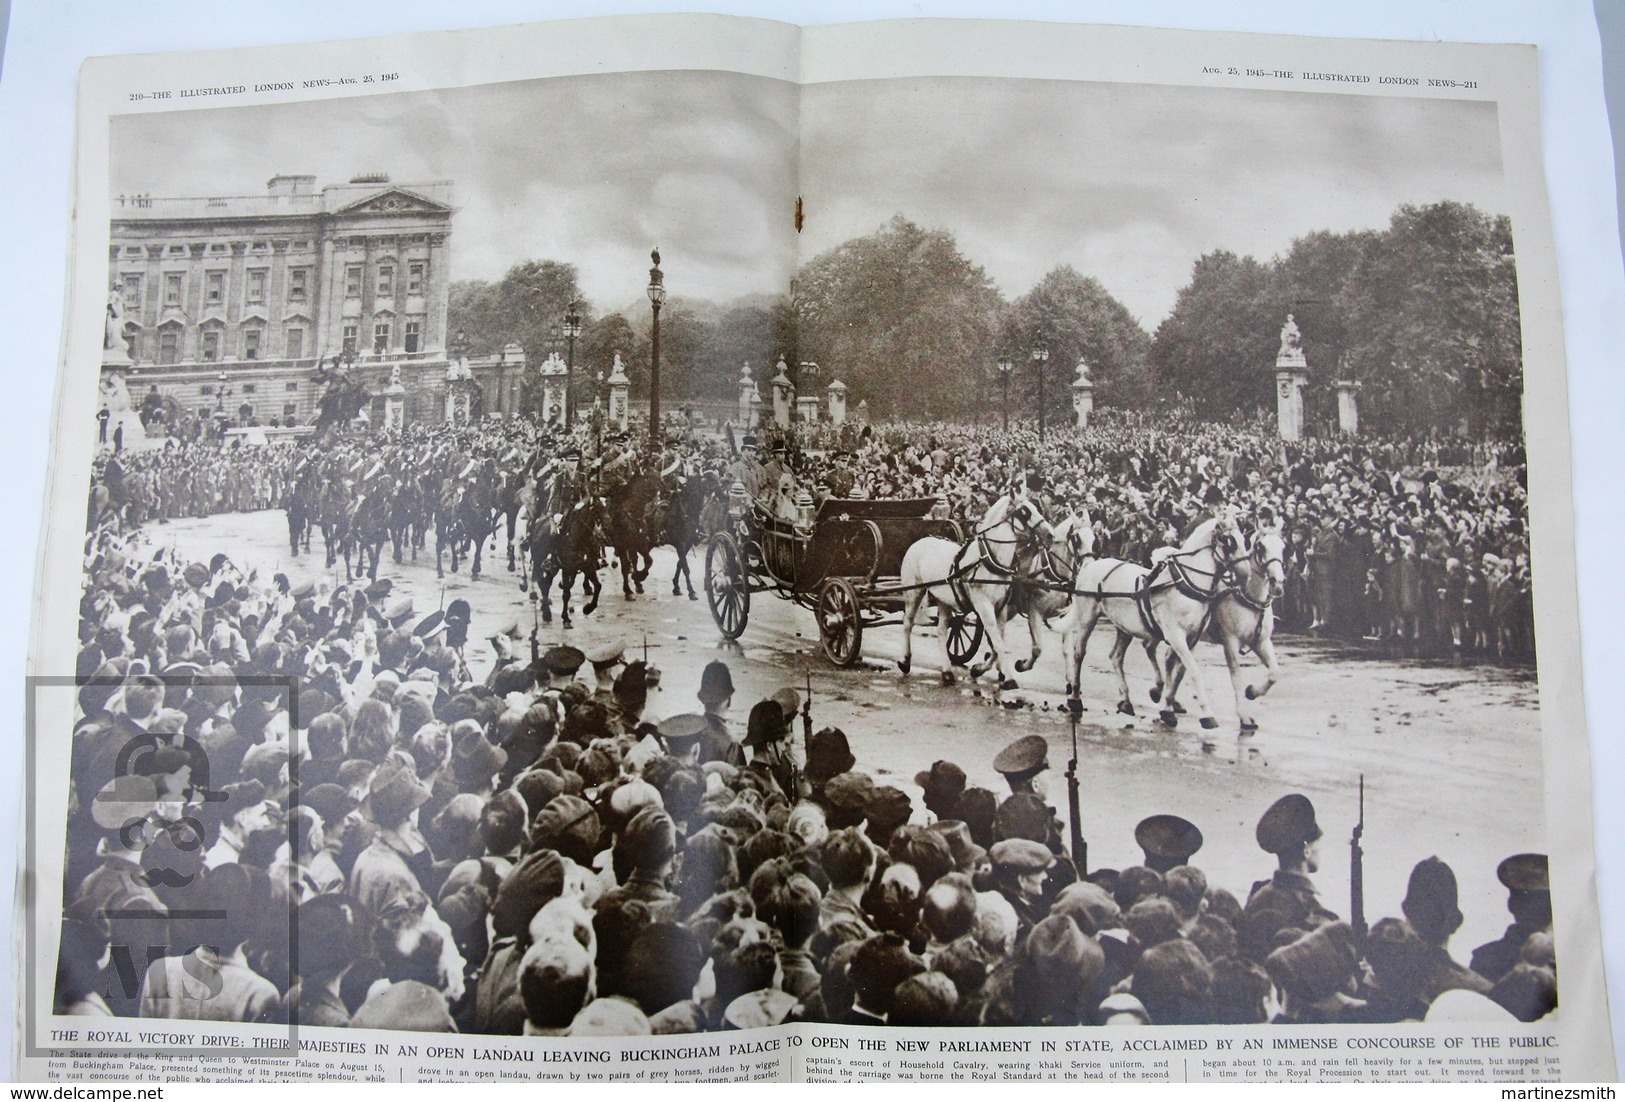 WWII The Illustrated London News, August 25, 1945 - Their Majesties And The Princesses Of England - Geschiedenis